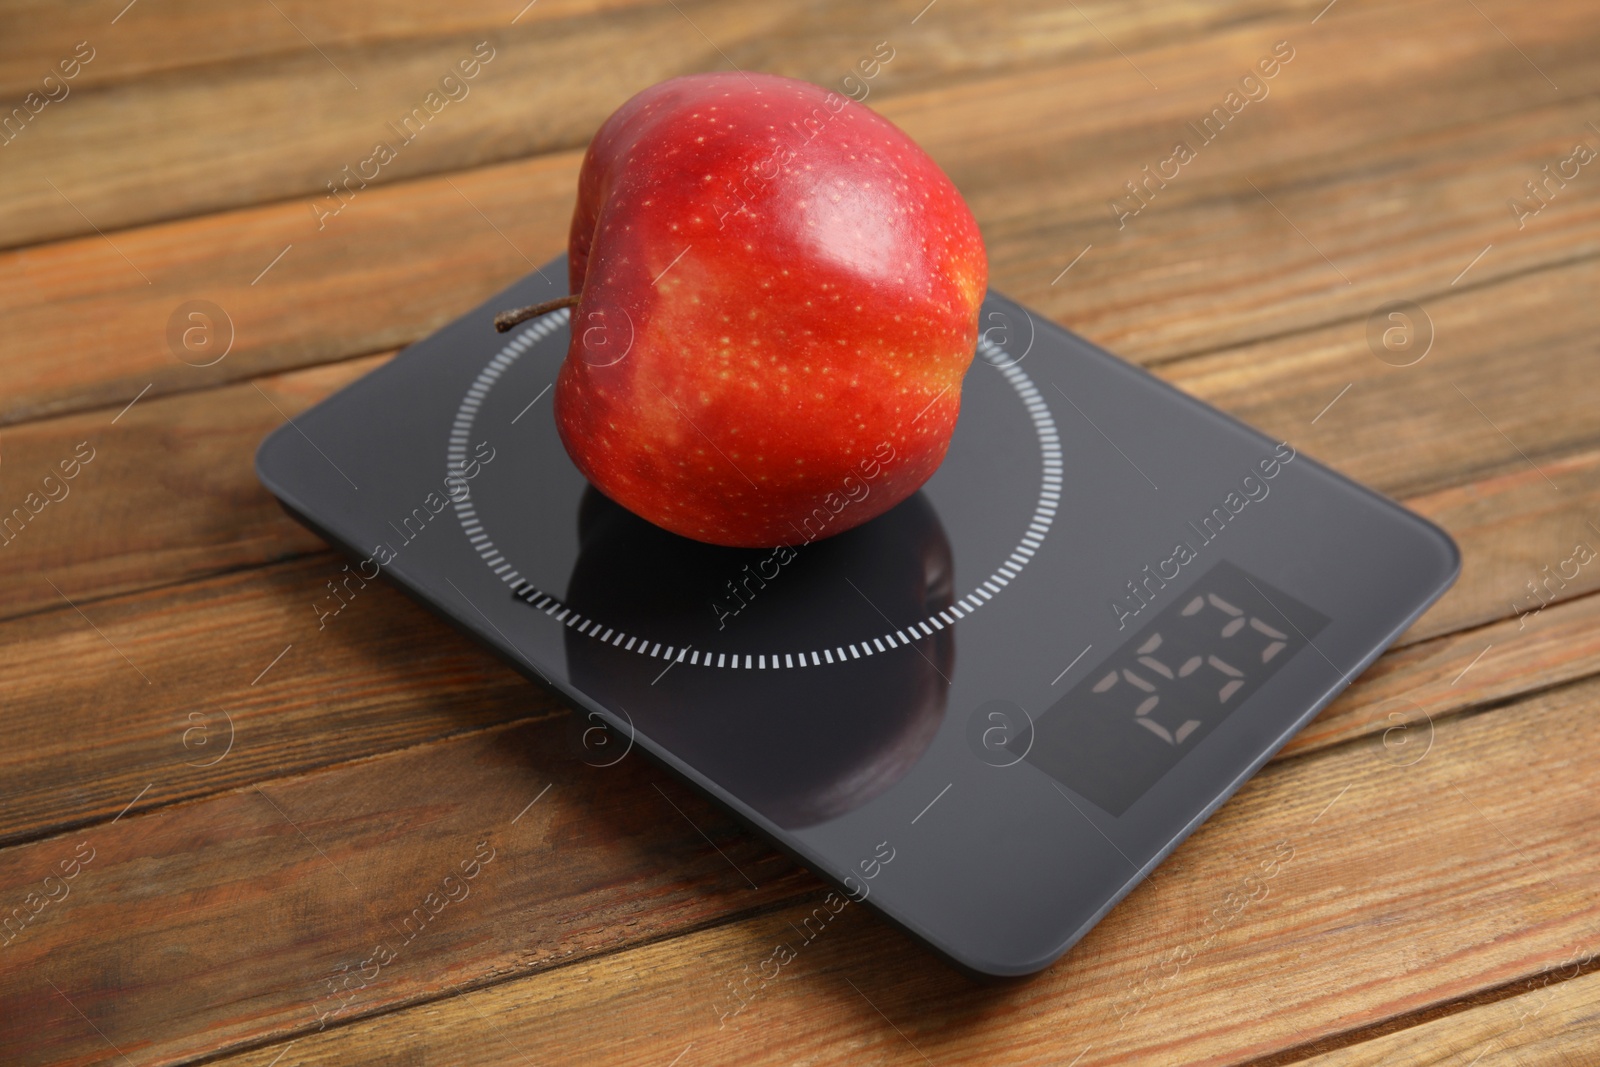 Photo of Ripe red apple and electronic scales on wooden table